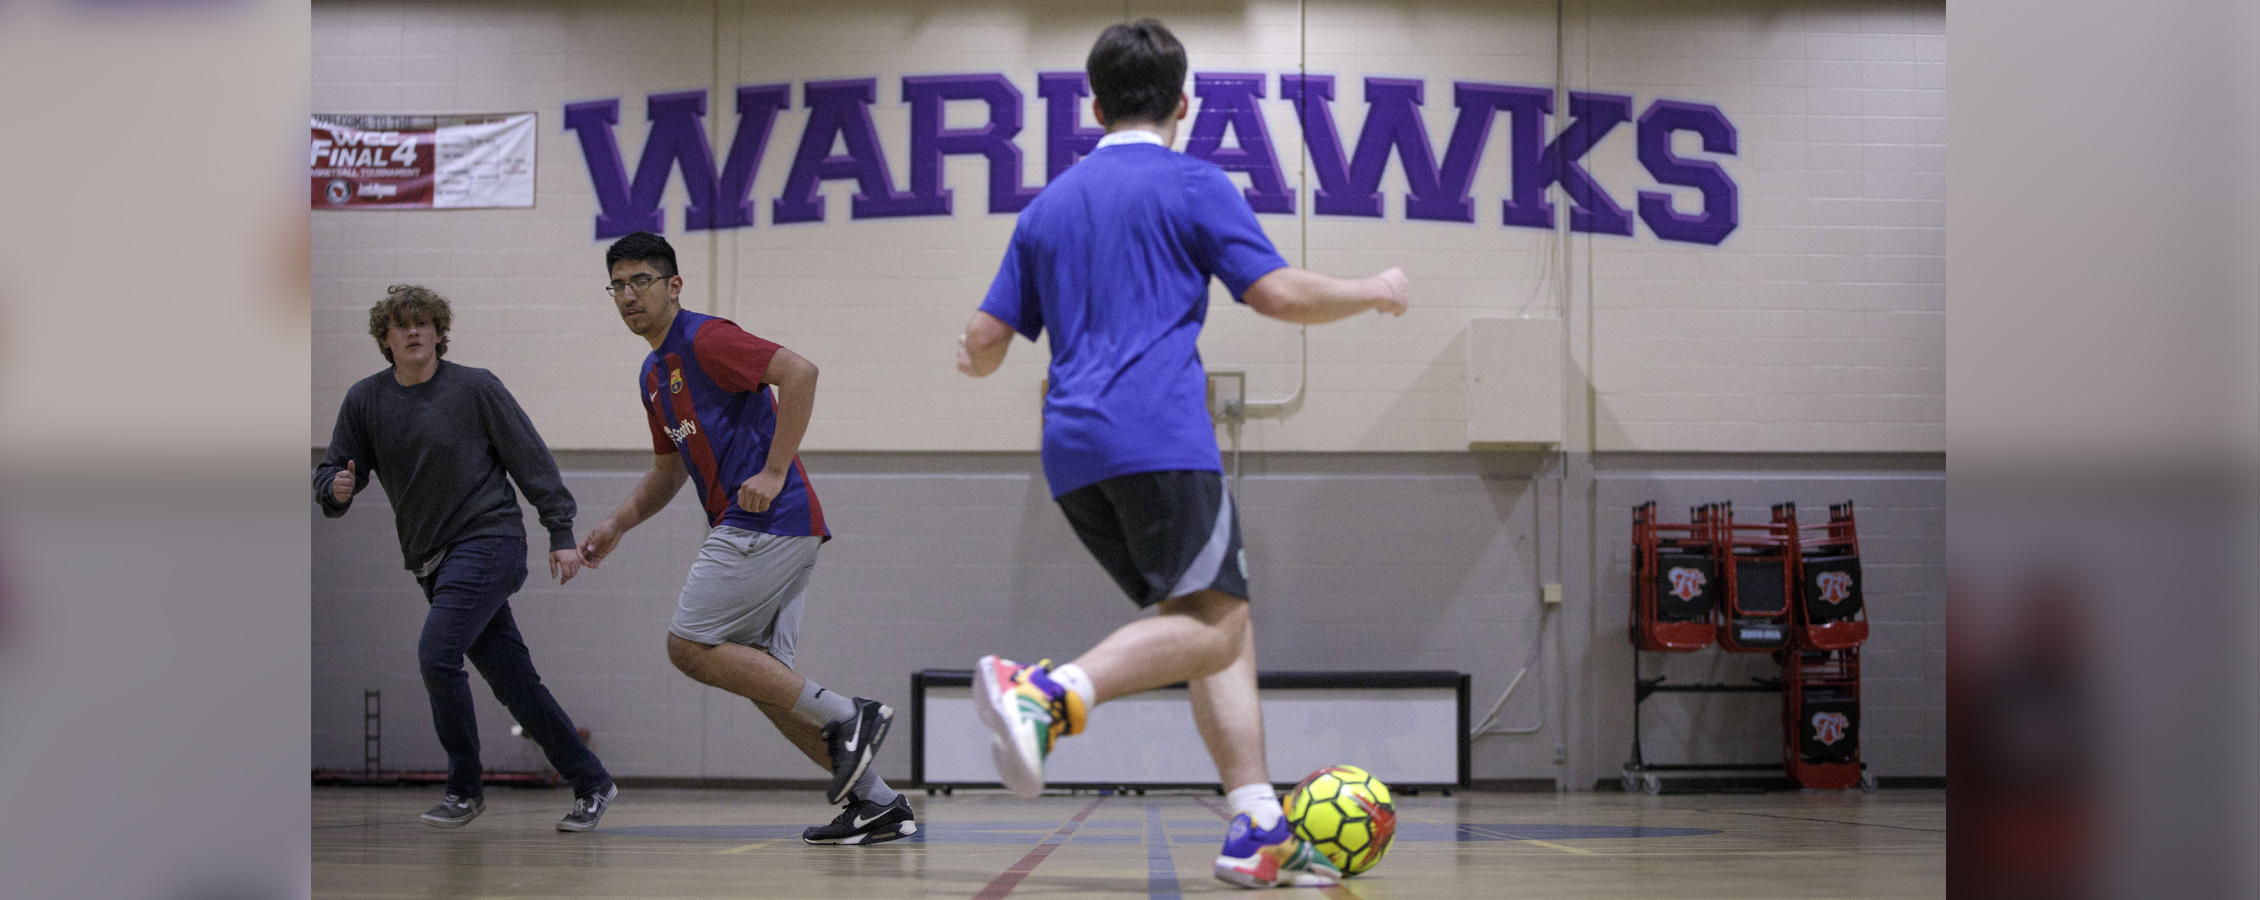 A student dribbles a soccer ball in a gym with the words Warhawks on the wall.